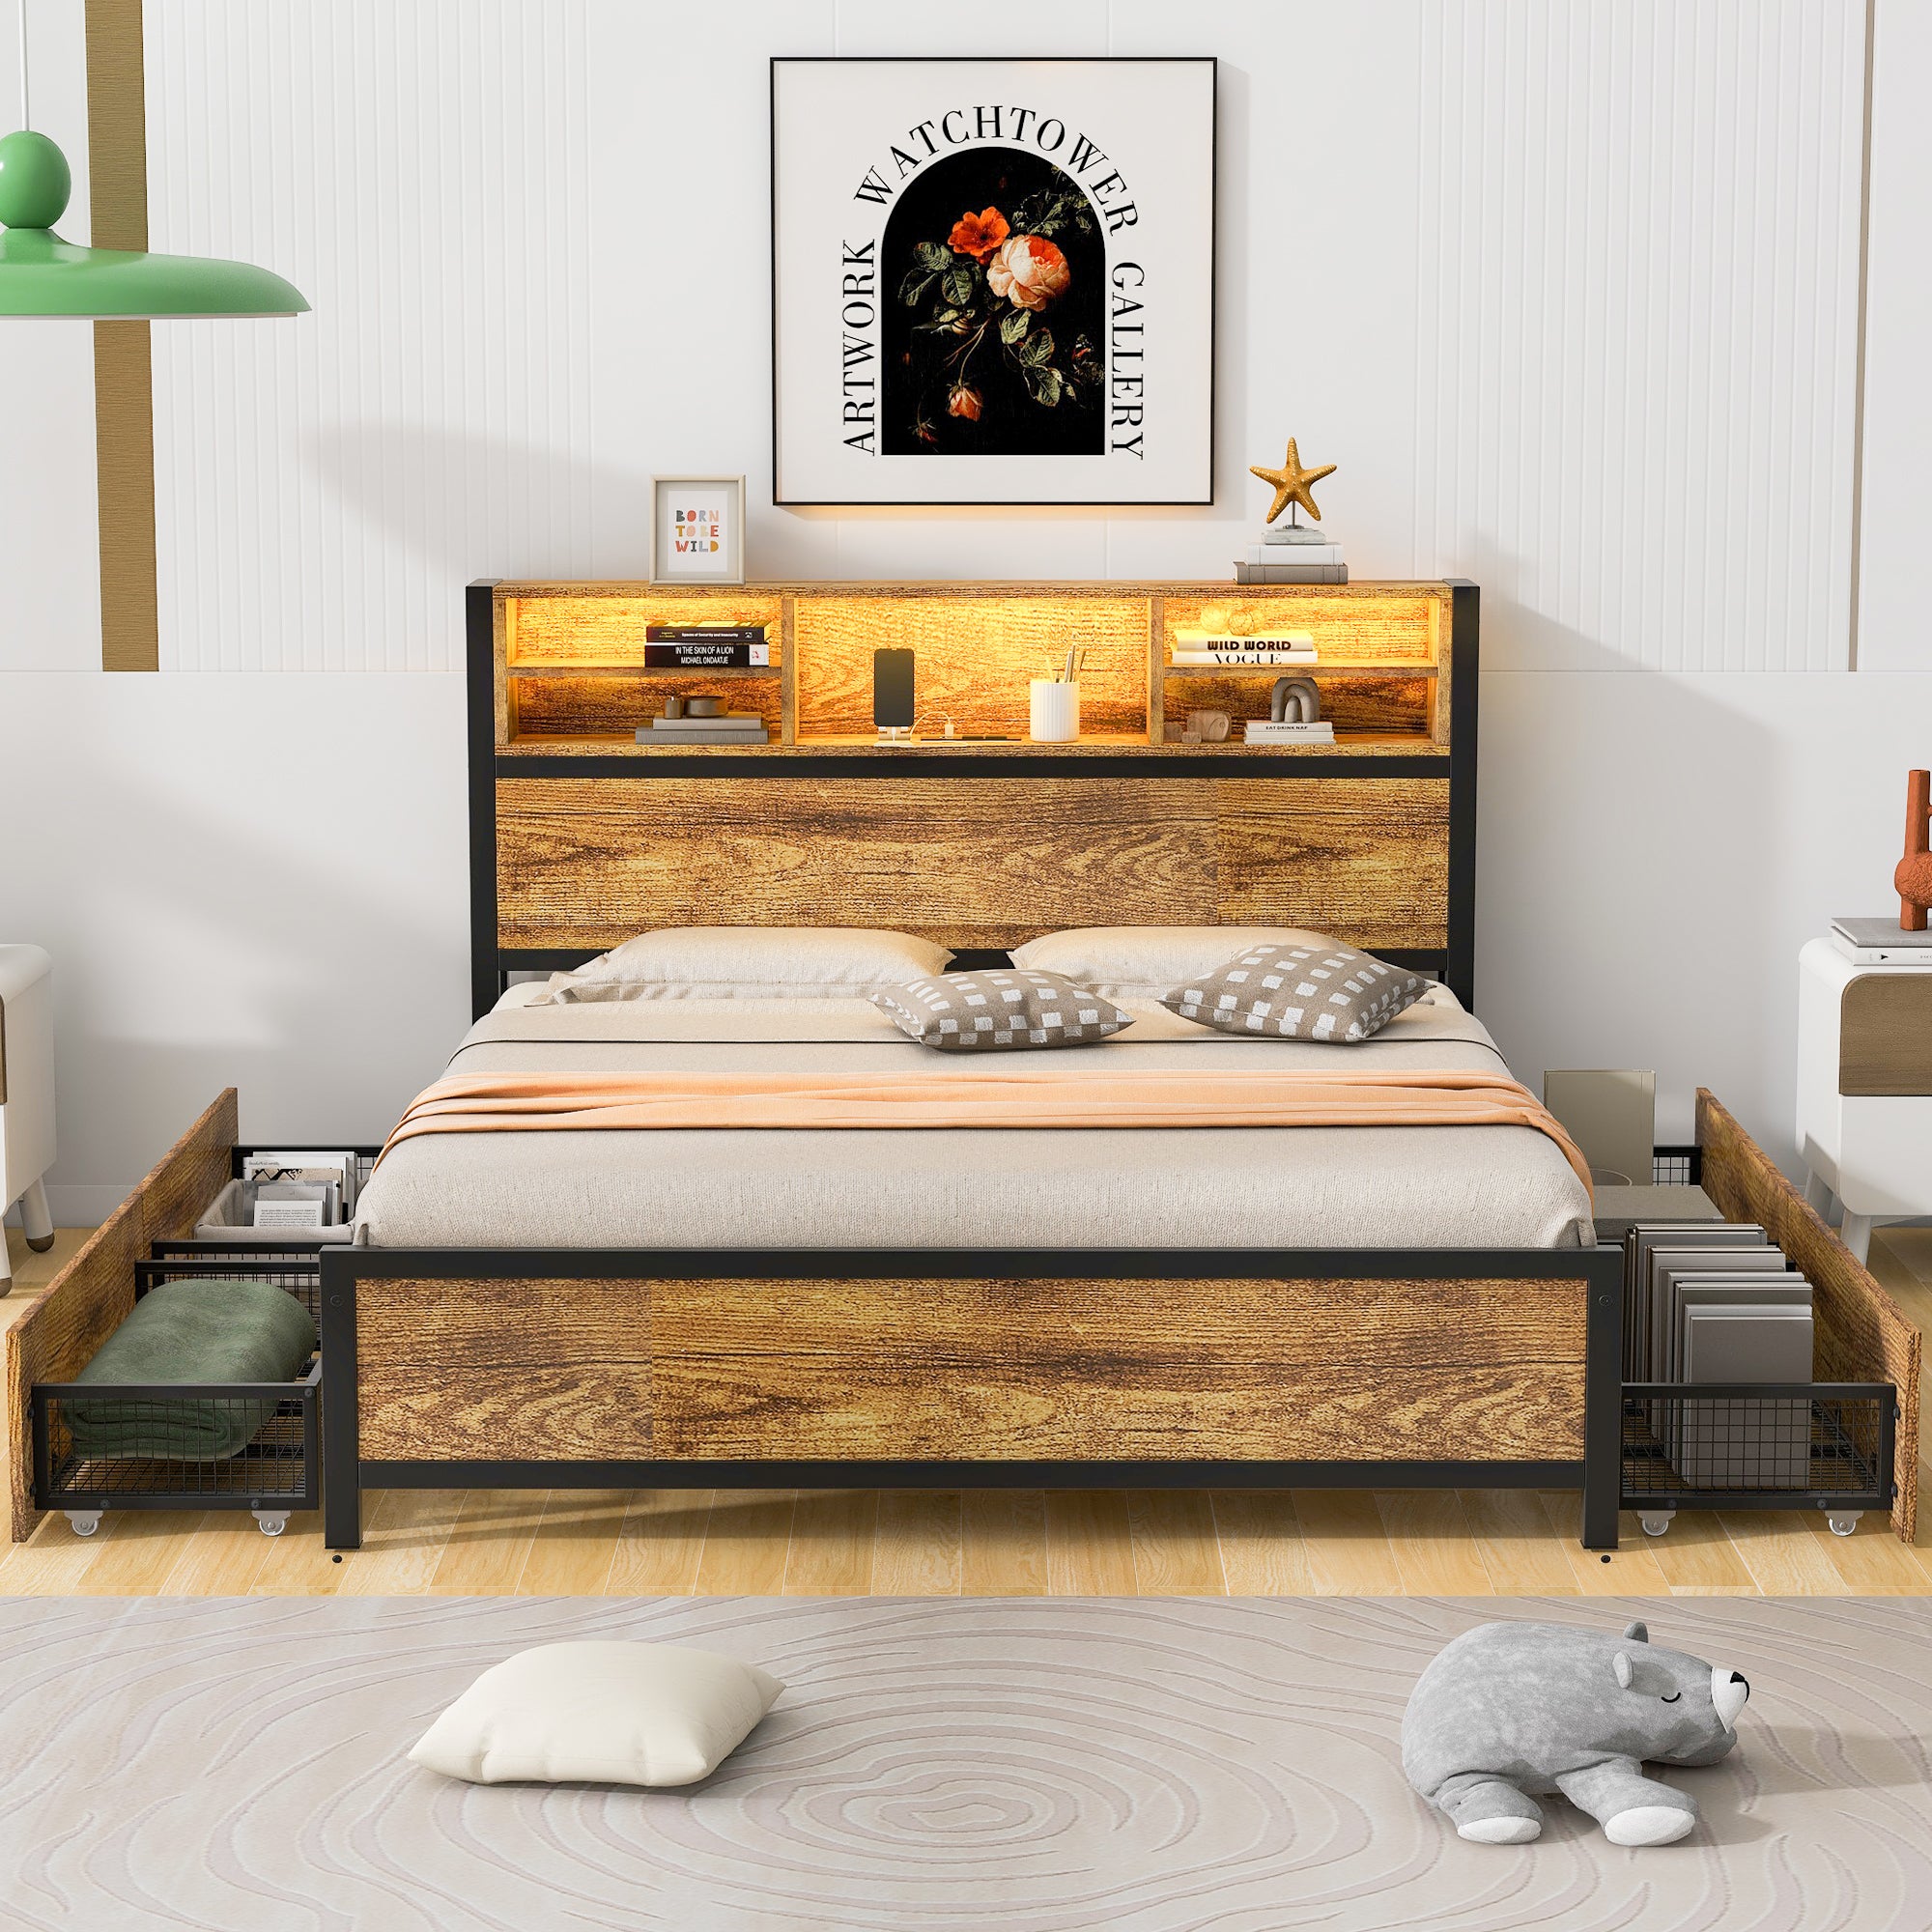 Bellemave Metal Platform Bed With 4 drawers, Sockets and USB Ports